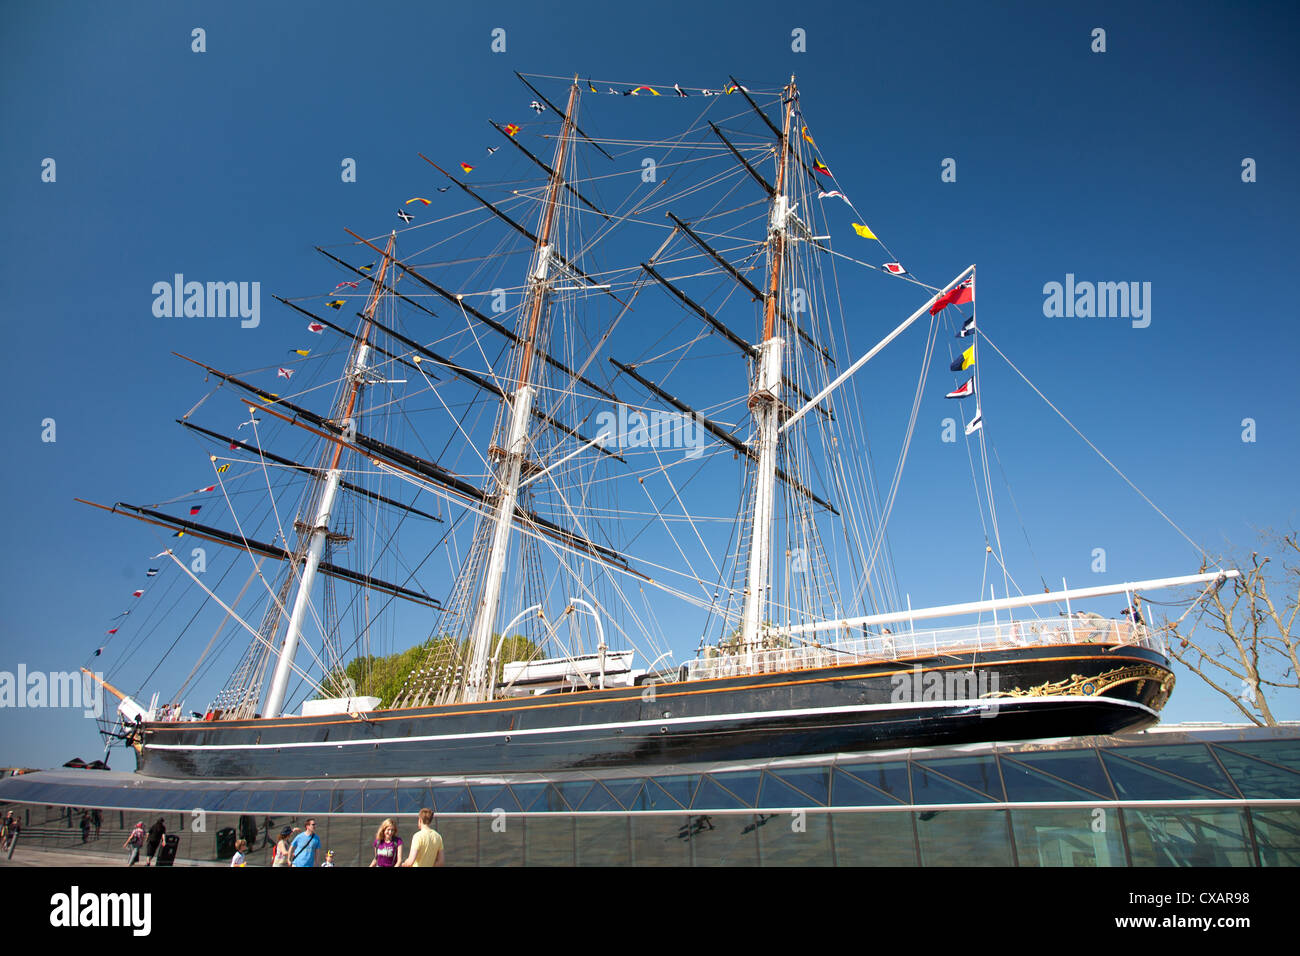 View of the Cutty Sark after restoration, Greenwich, London, England, United Kingdom, Europe Stock Photo